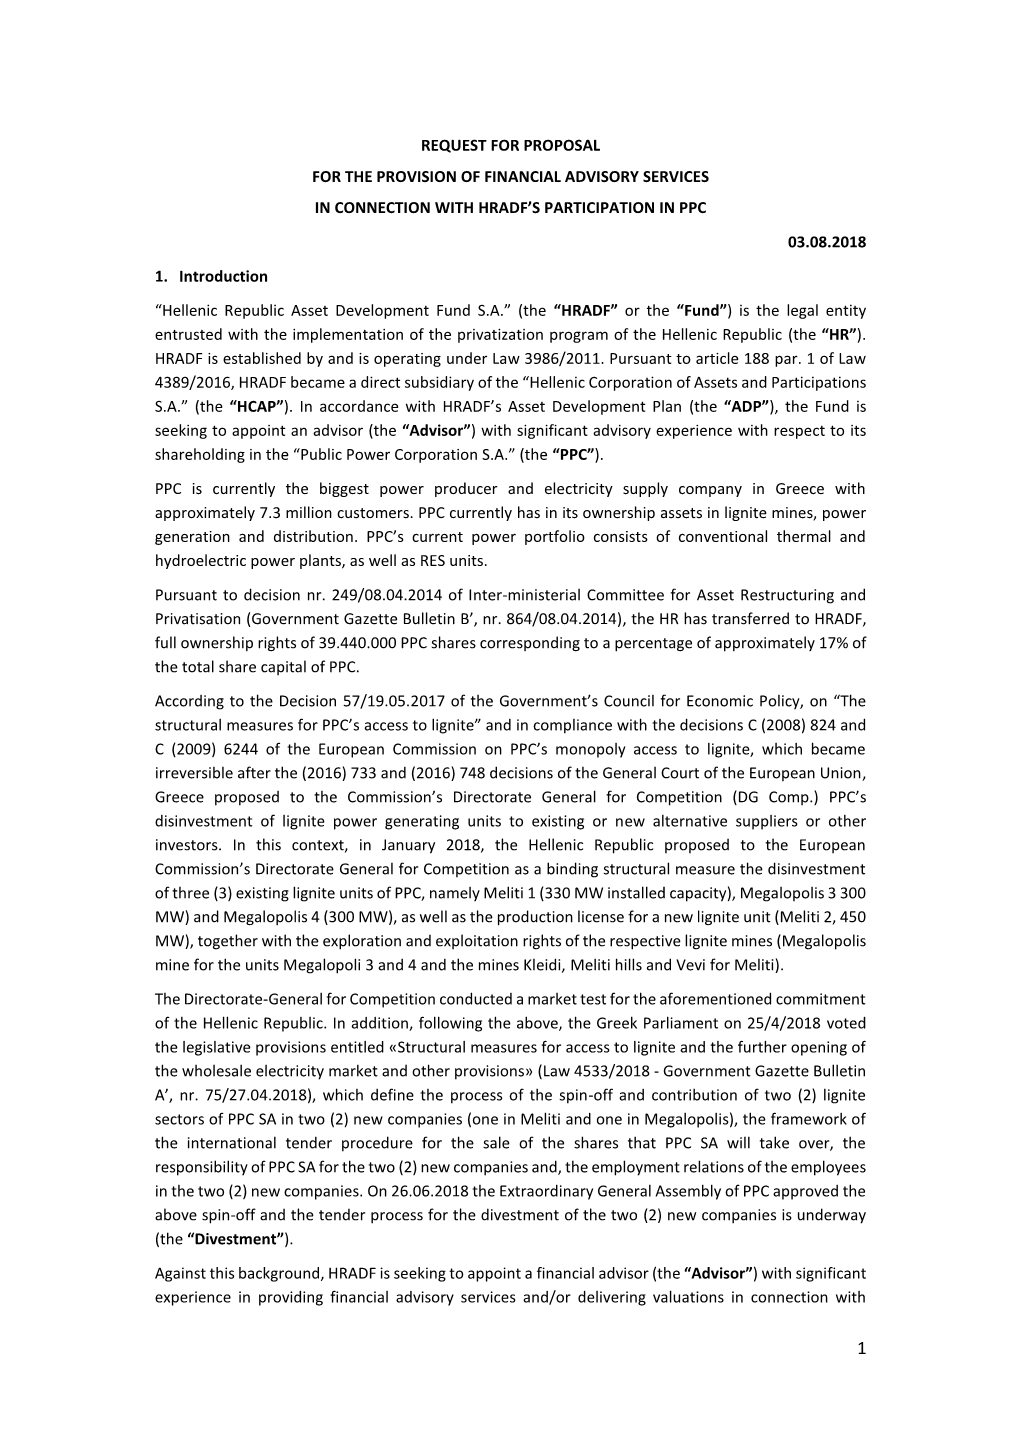 Request for Proposal for the Provision of Financial Advisory Services in Connection with Hradf’S Participation in Ppc